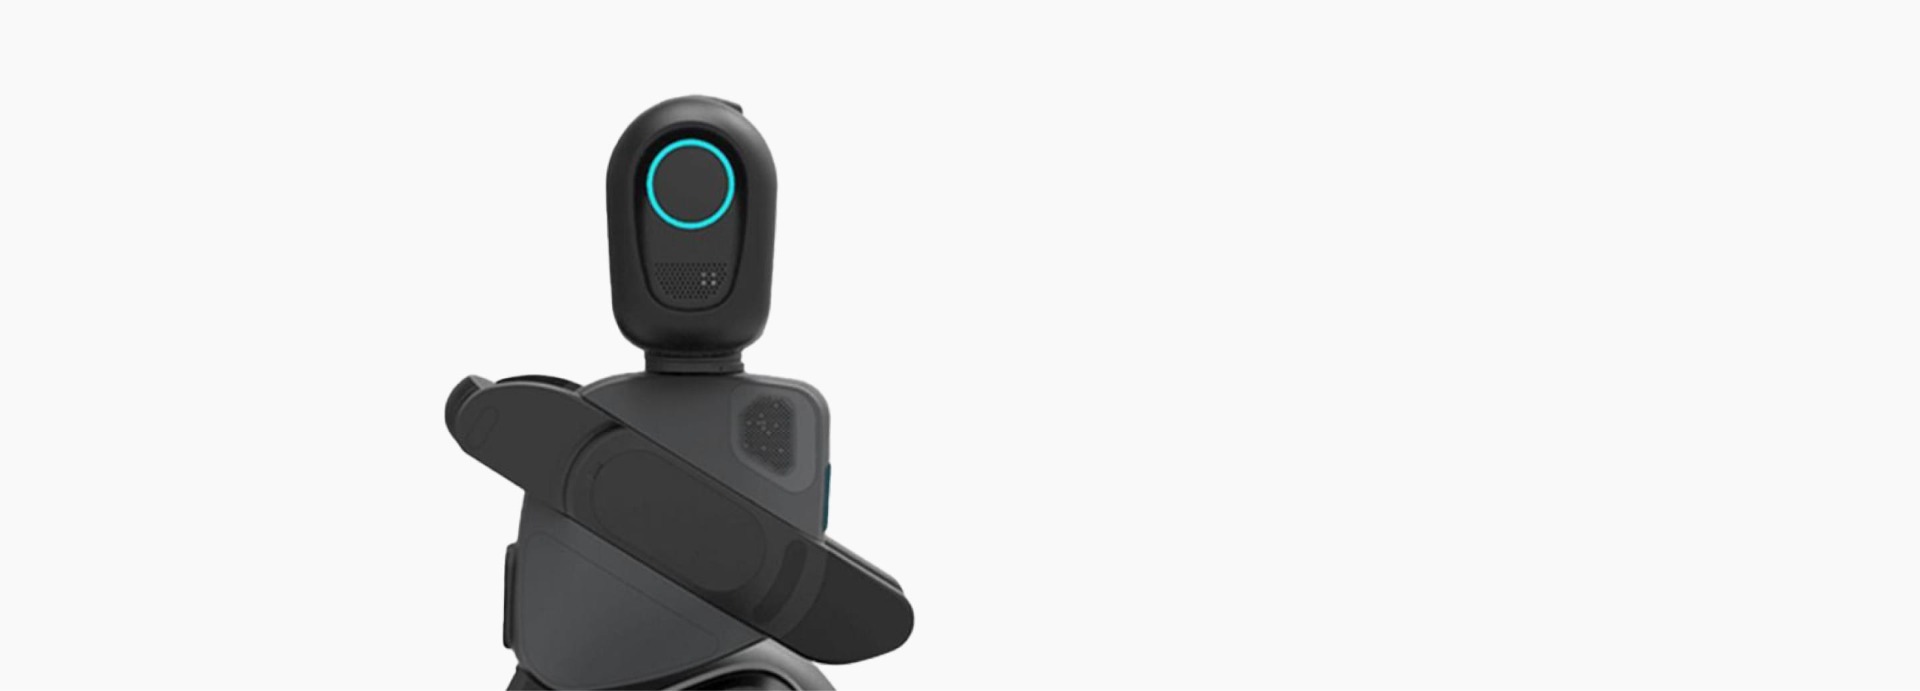 With Loomo, Segway takes robotics far from the home